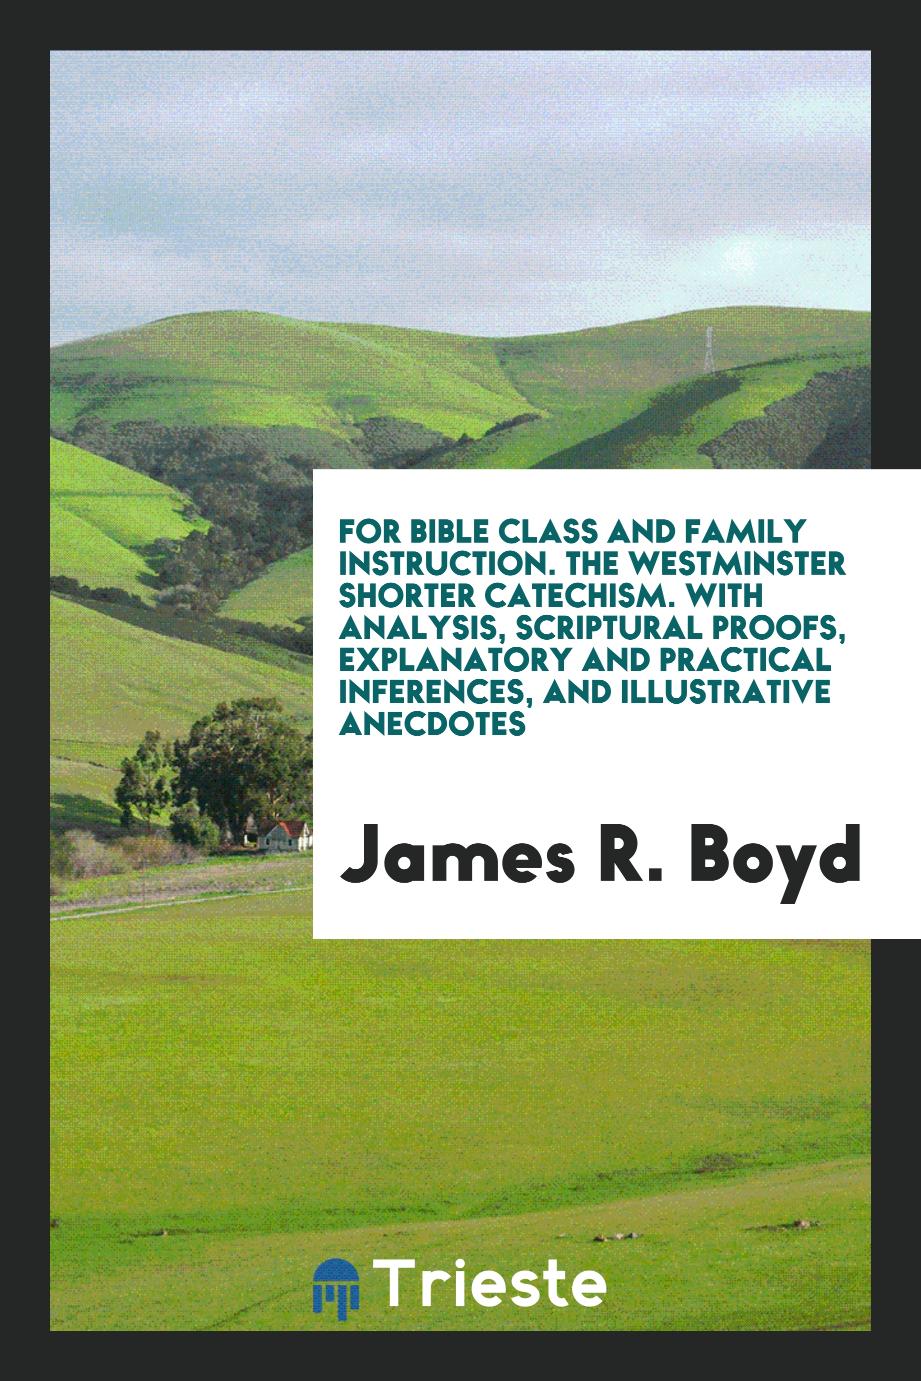 For Bible Class and Family Instruction. The Westminster Shorter Catechism. With Analysis, Scriptural Proofs, Explanatory and Practical Inferences, and Illustrative Anecdotes